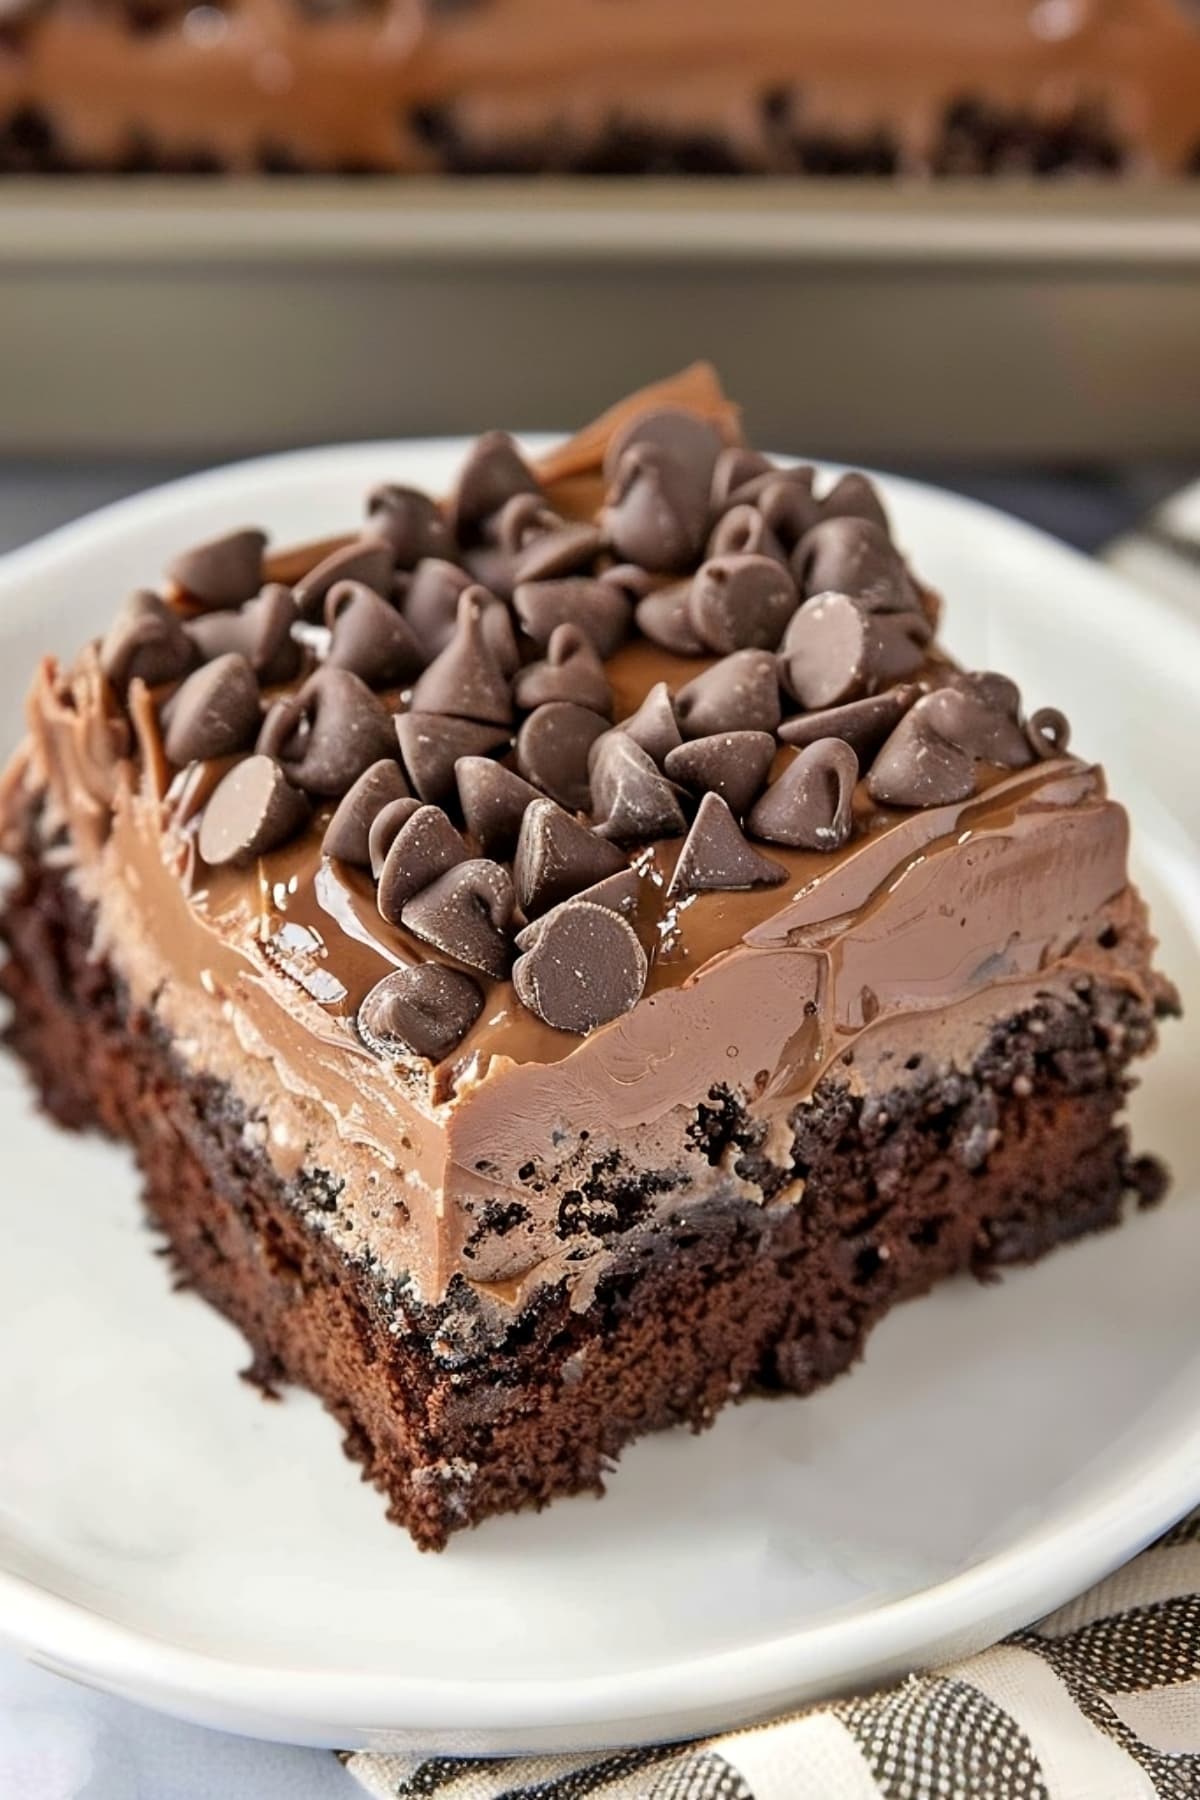 A piece of chocolate poke cake topped with chocolate chips on a white plate